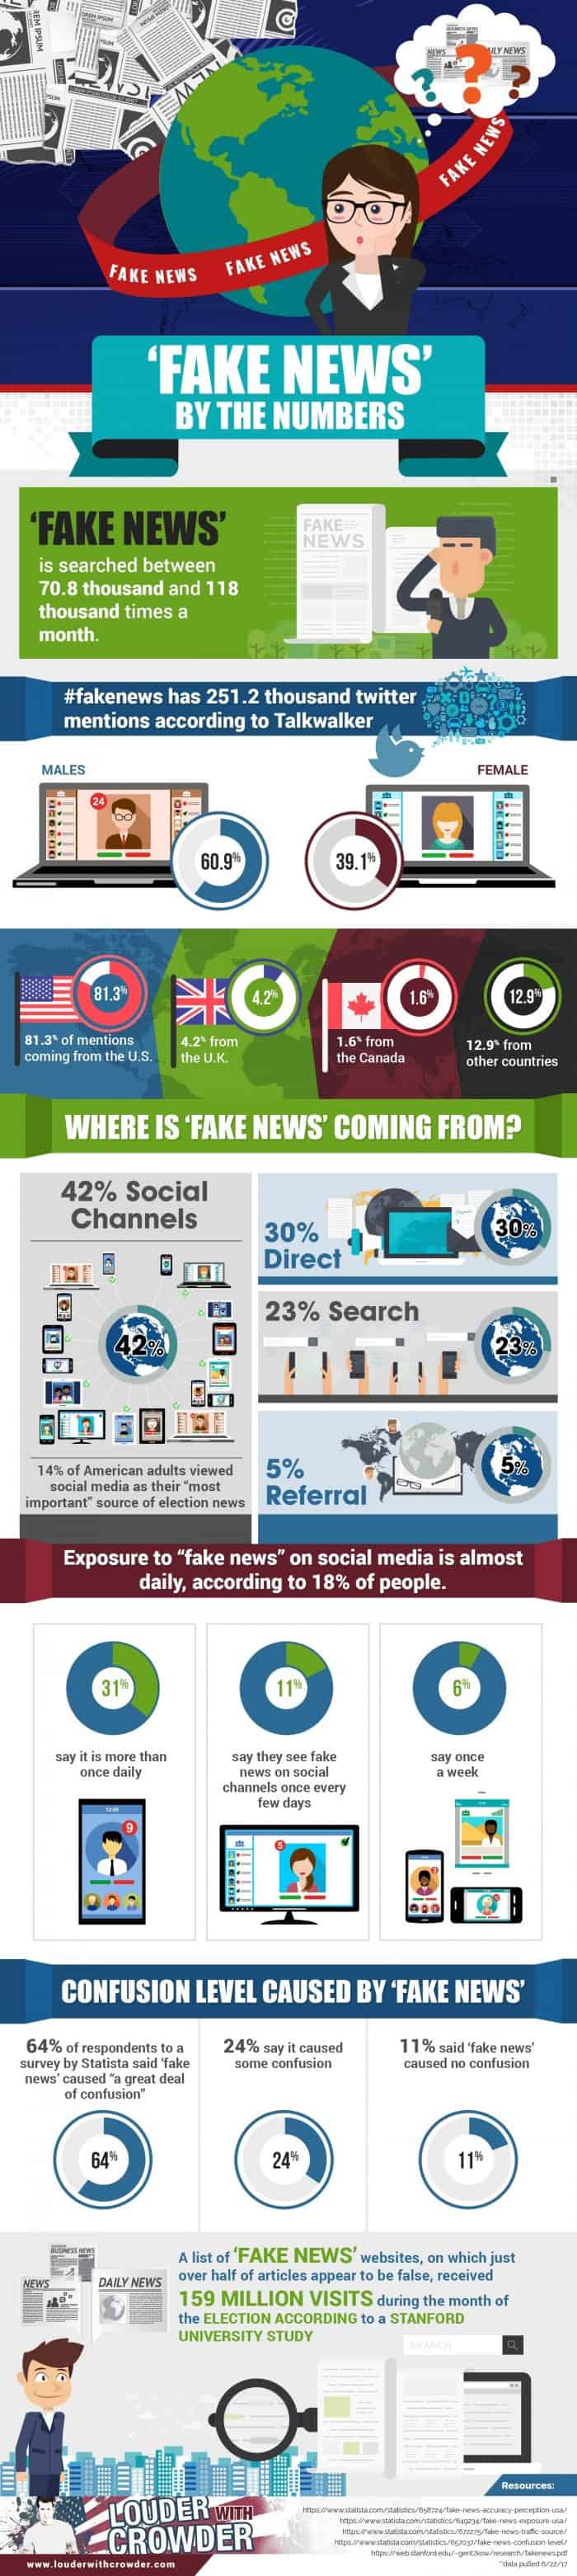 "Fake News" by the Numbers